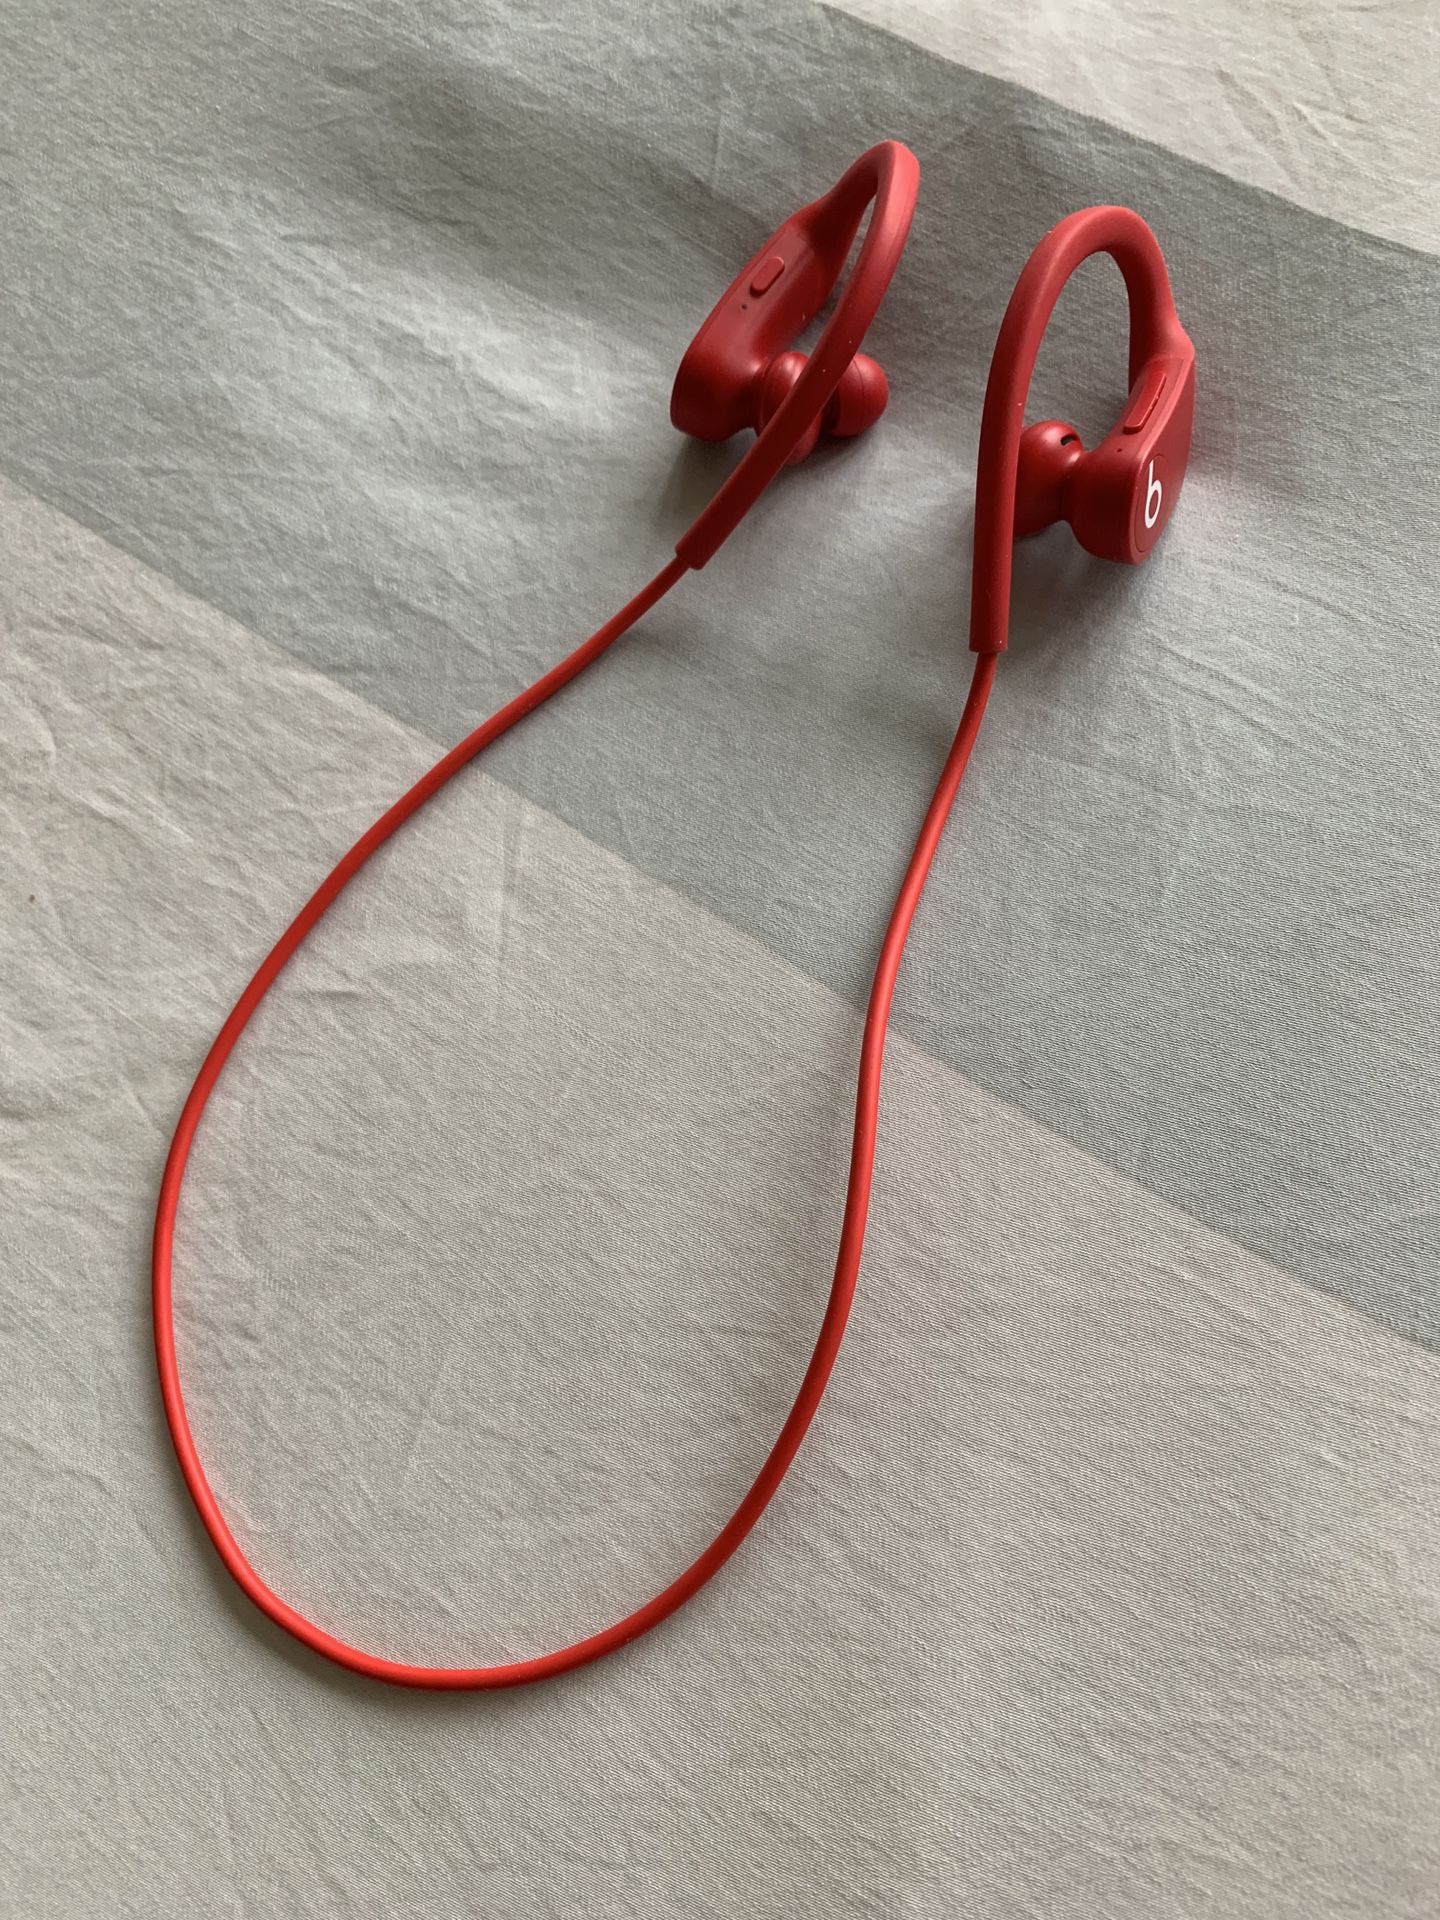 Powerbeats - Red - Great Condition